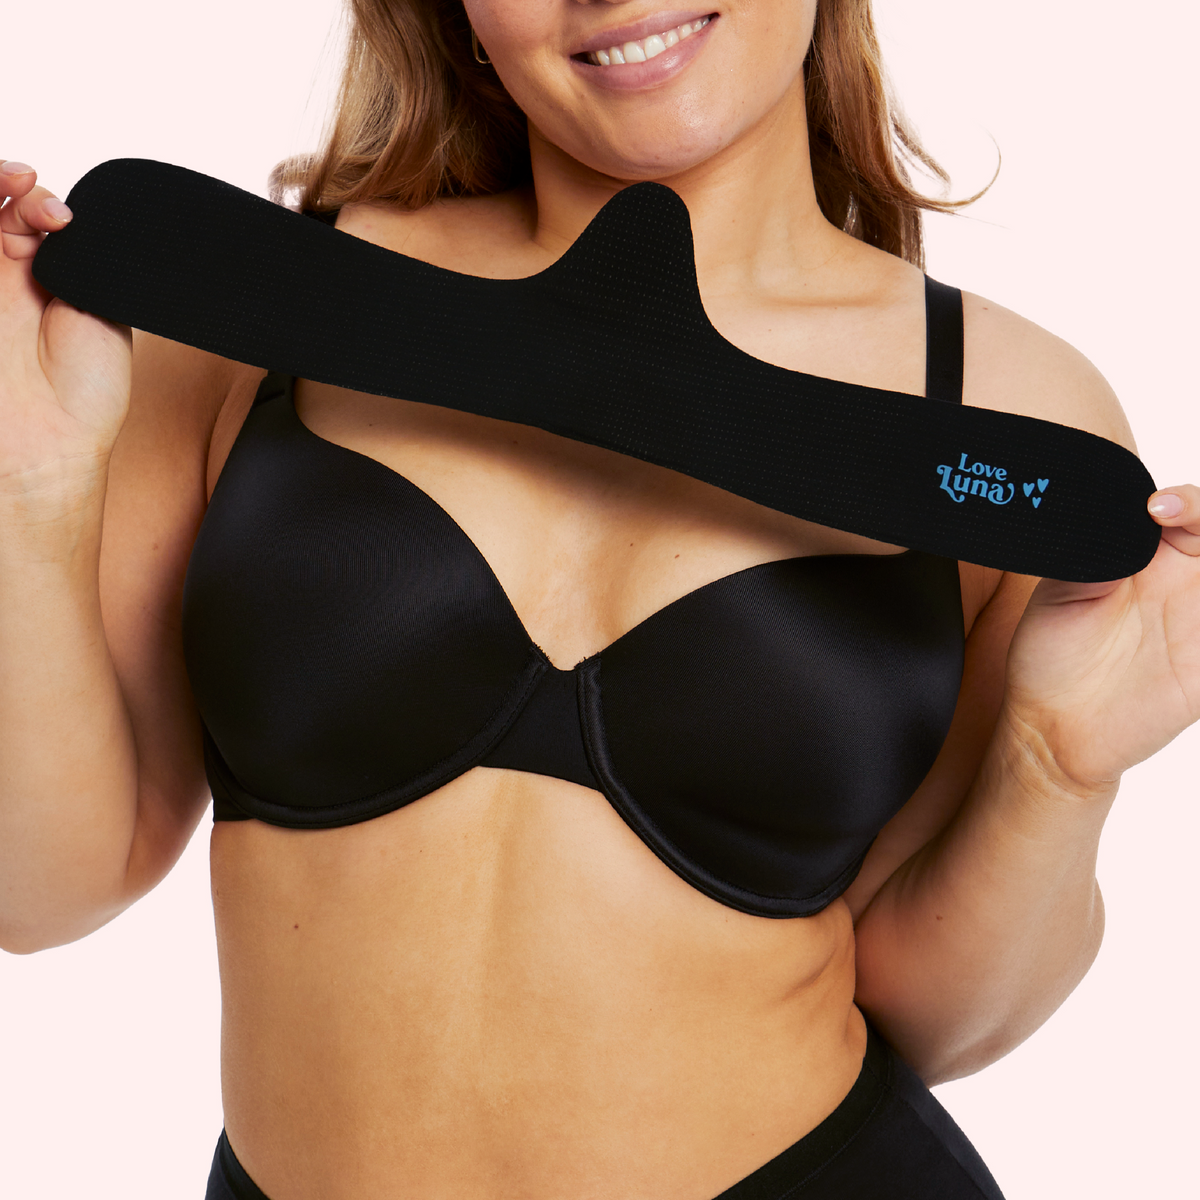 Love Luna, Love a hot girl summer, but hate when the girls are sweaty? Us  too breastie! That's why we've created the Bra Sweat Liner. 💦 Simply